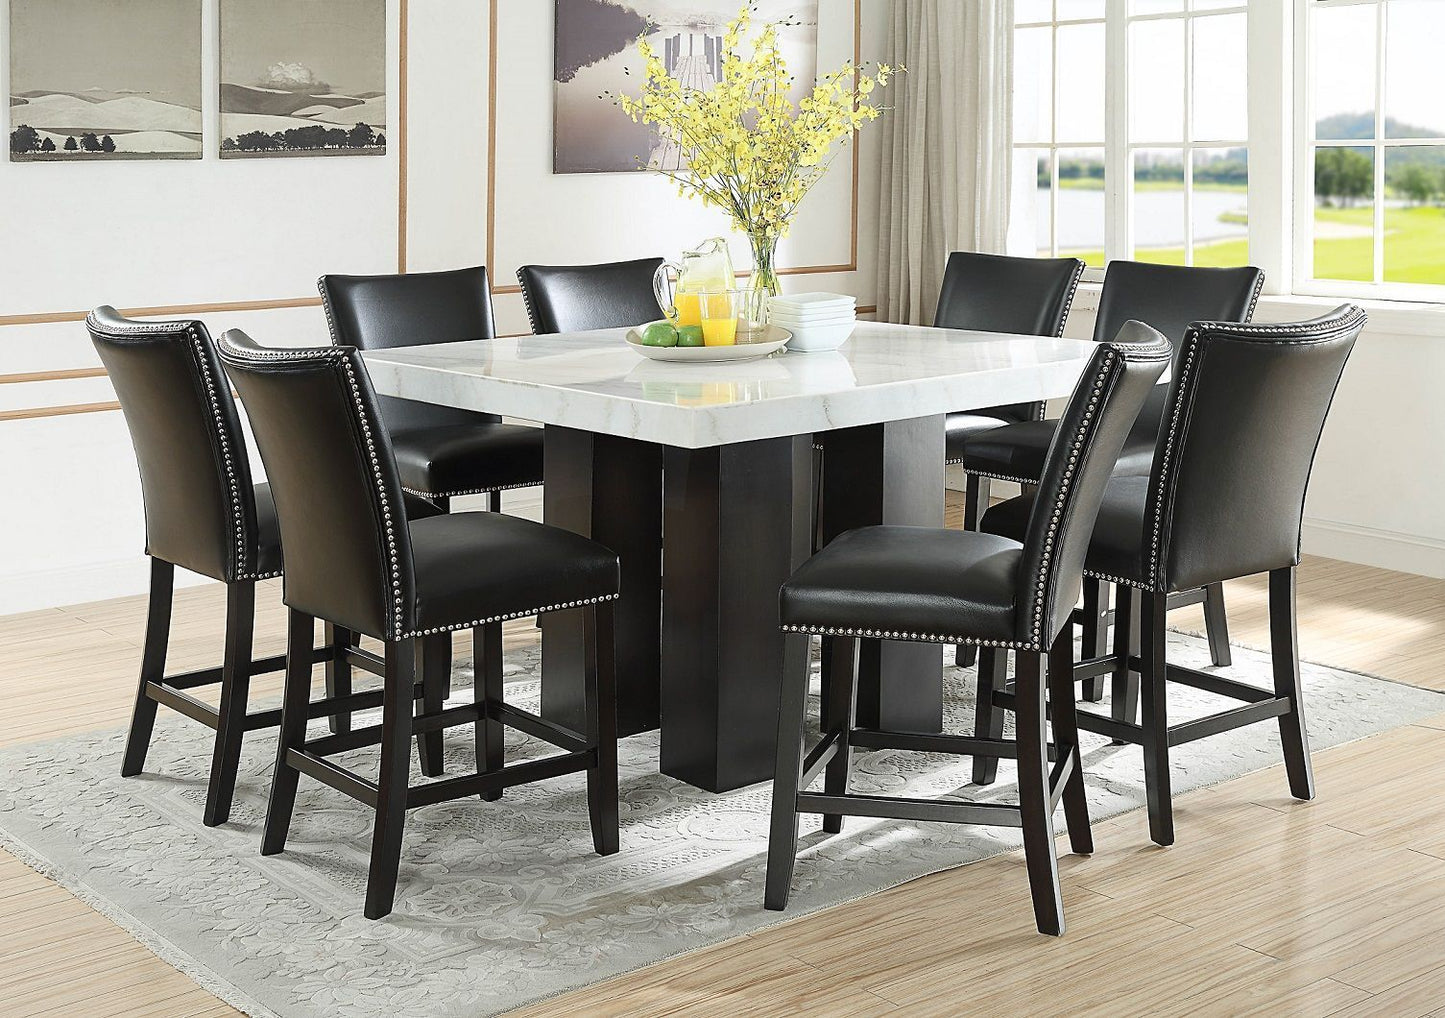 Camila Black Counter Height Chairs (includes 2 chairs) by Steve Silver